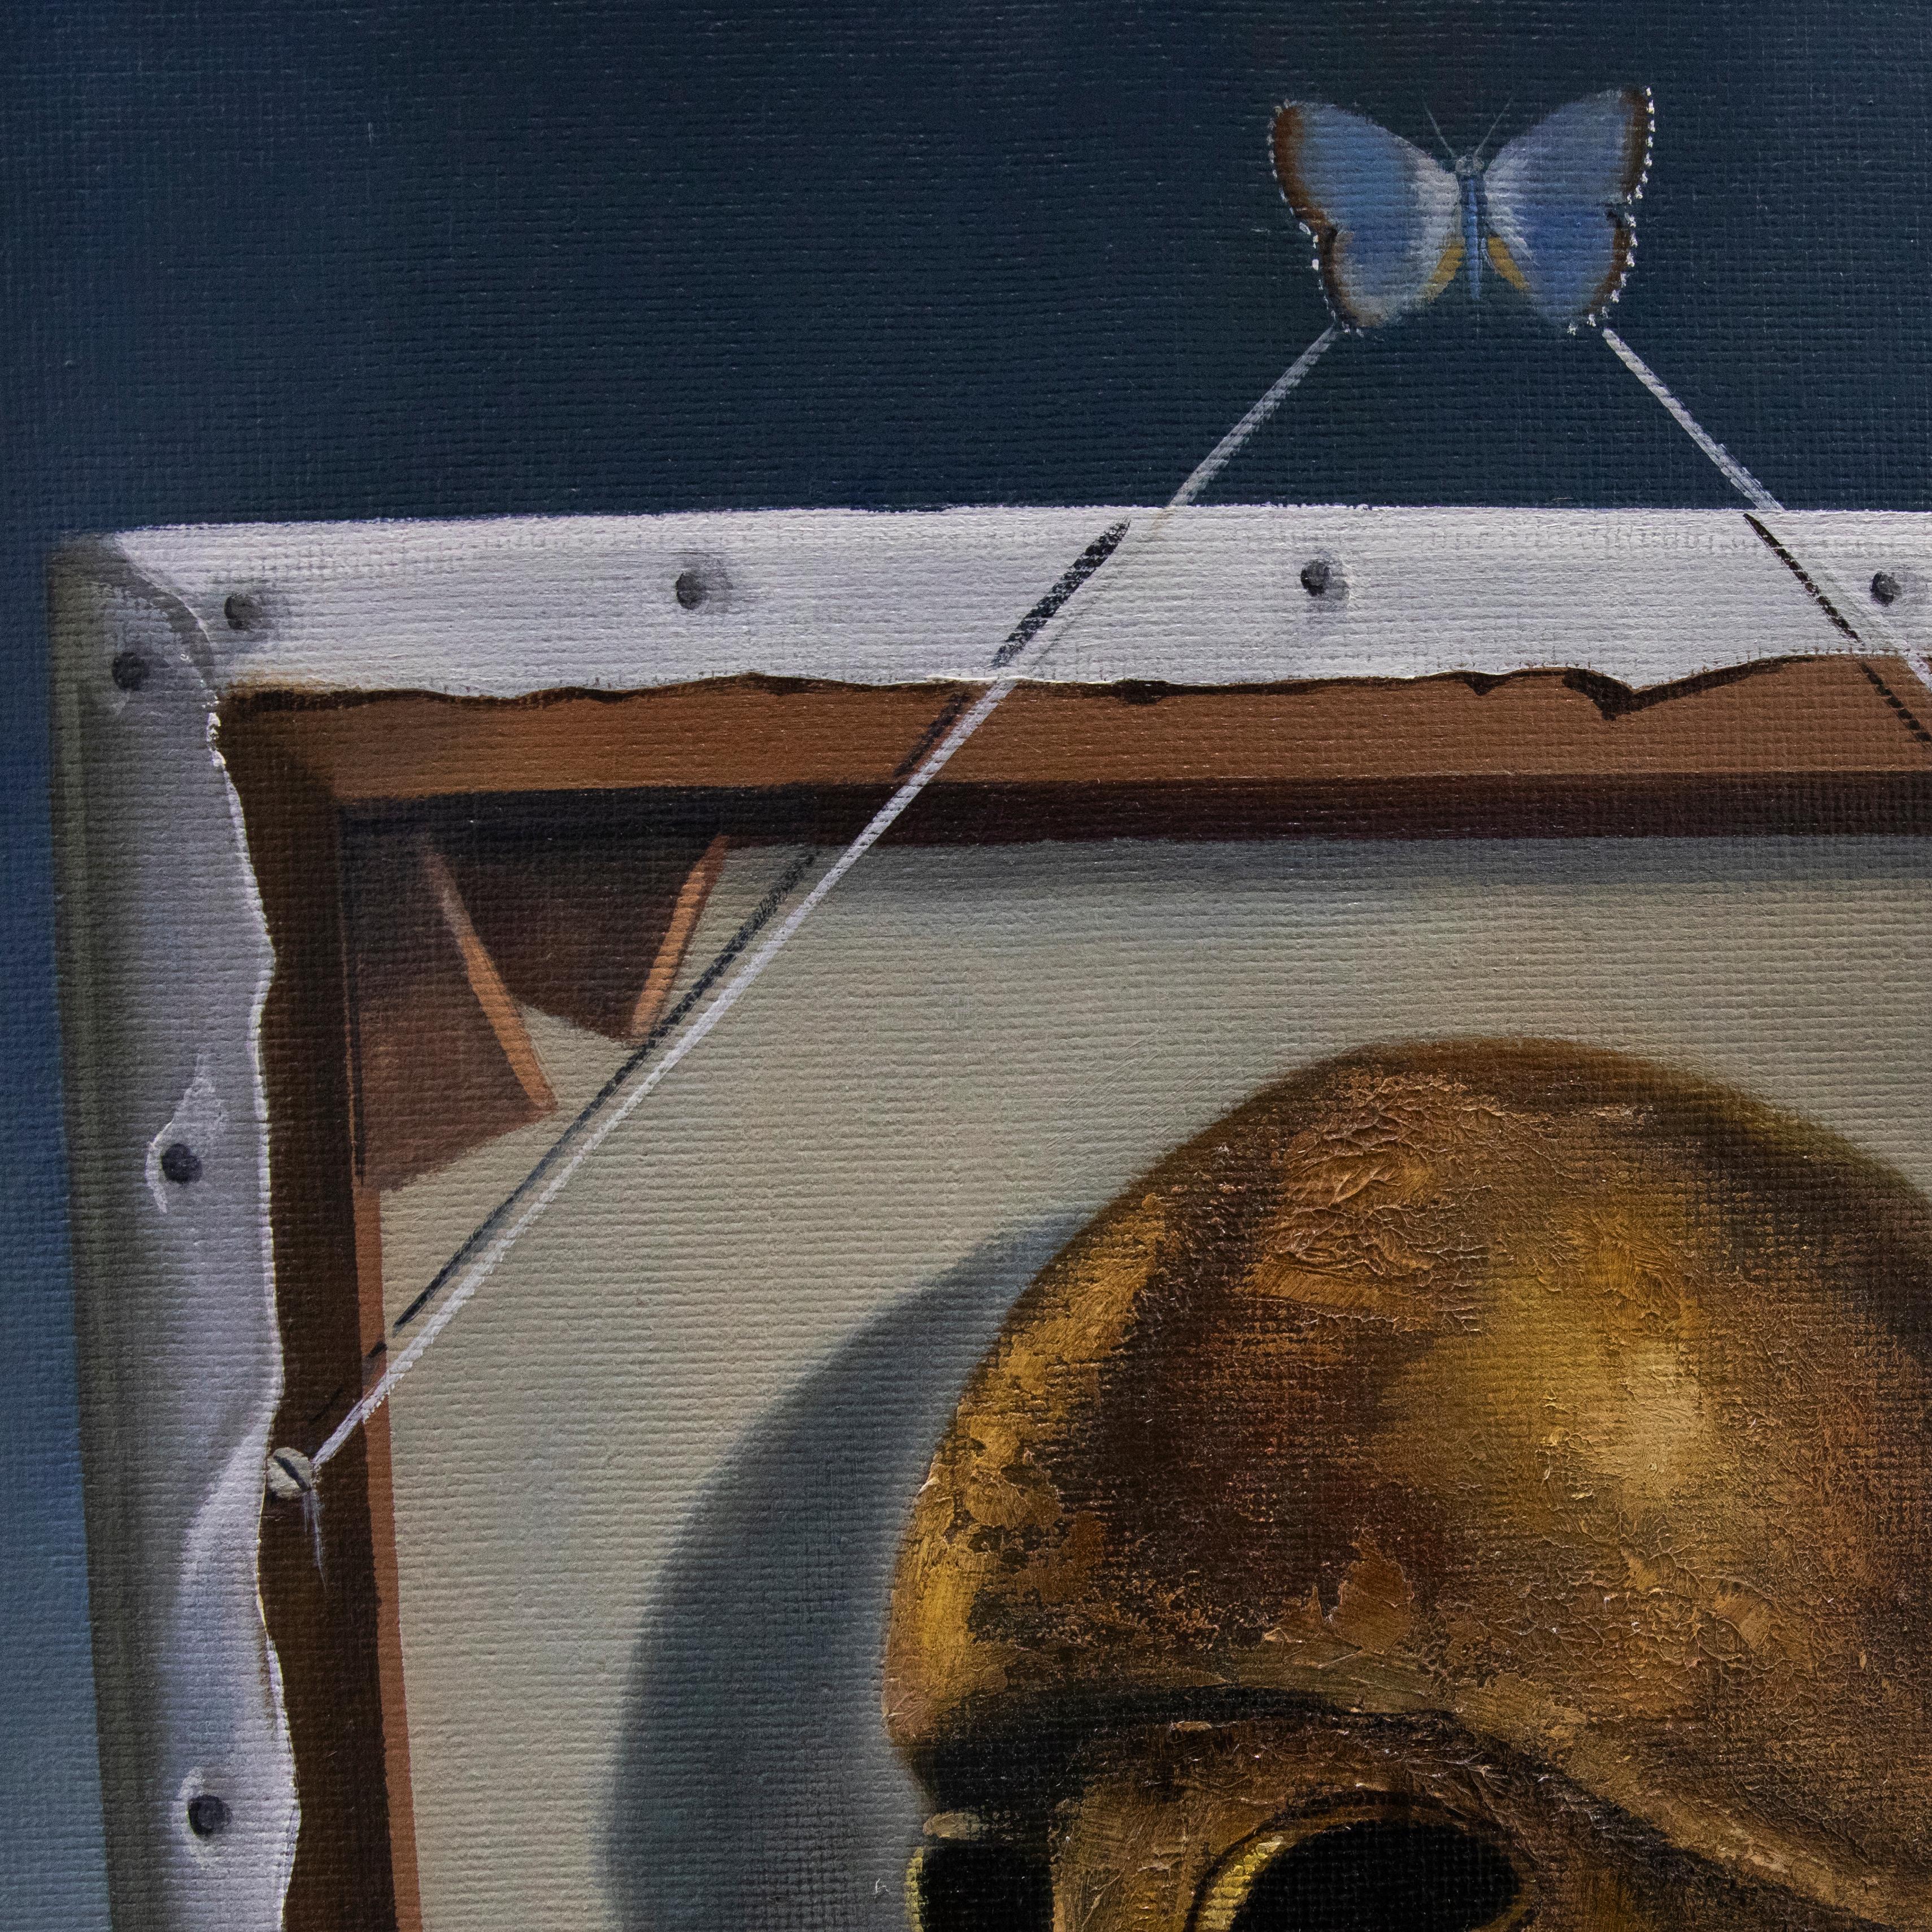 A charming surrealist study of a warrior's bronze helmet against the reverse of a stretched canvas. The canvas is held by a single butterfly that holds the string on each wing. The artist uses an accomplished hand to capture the atmospheric seascape